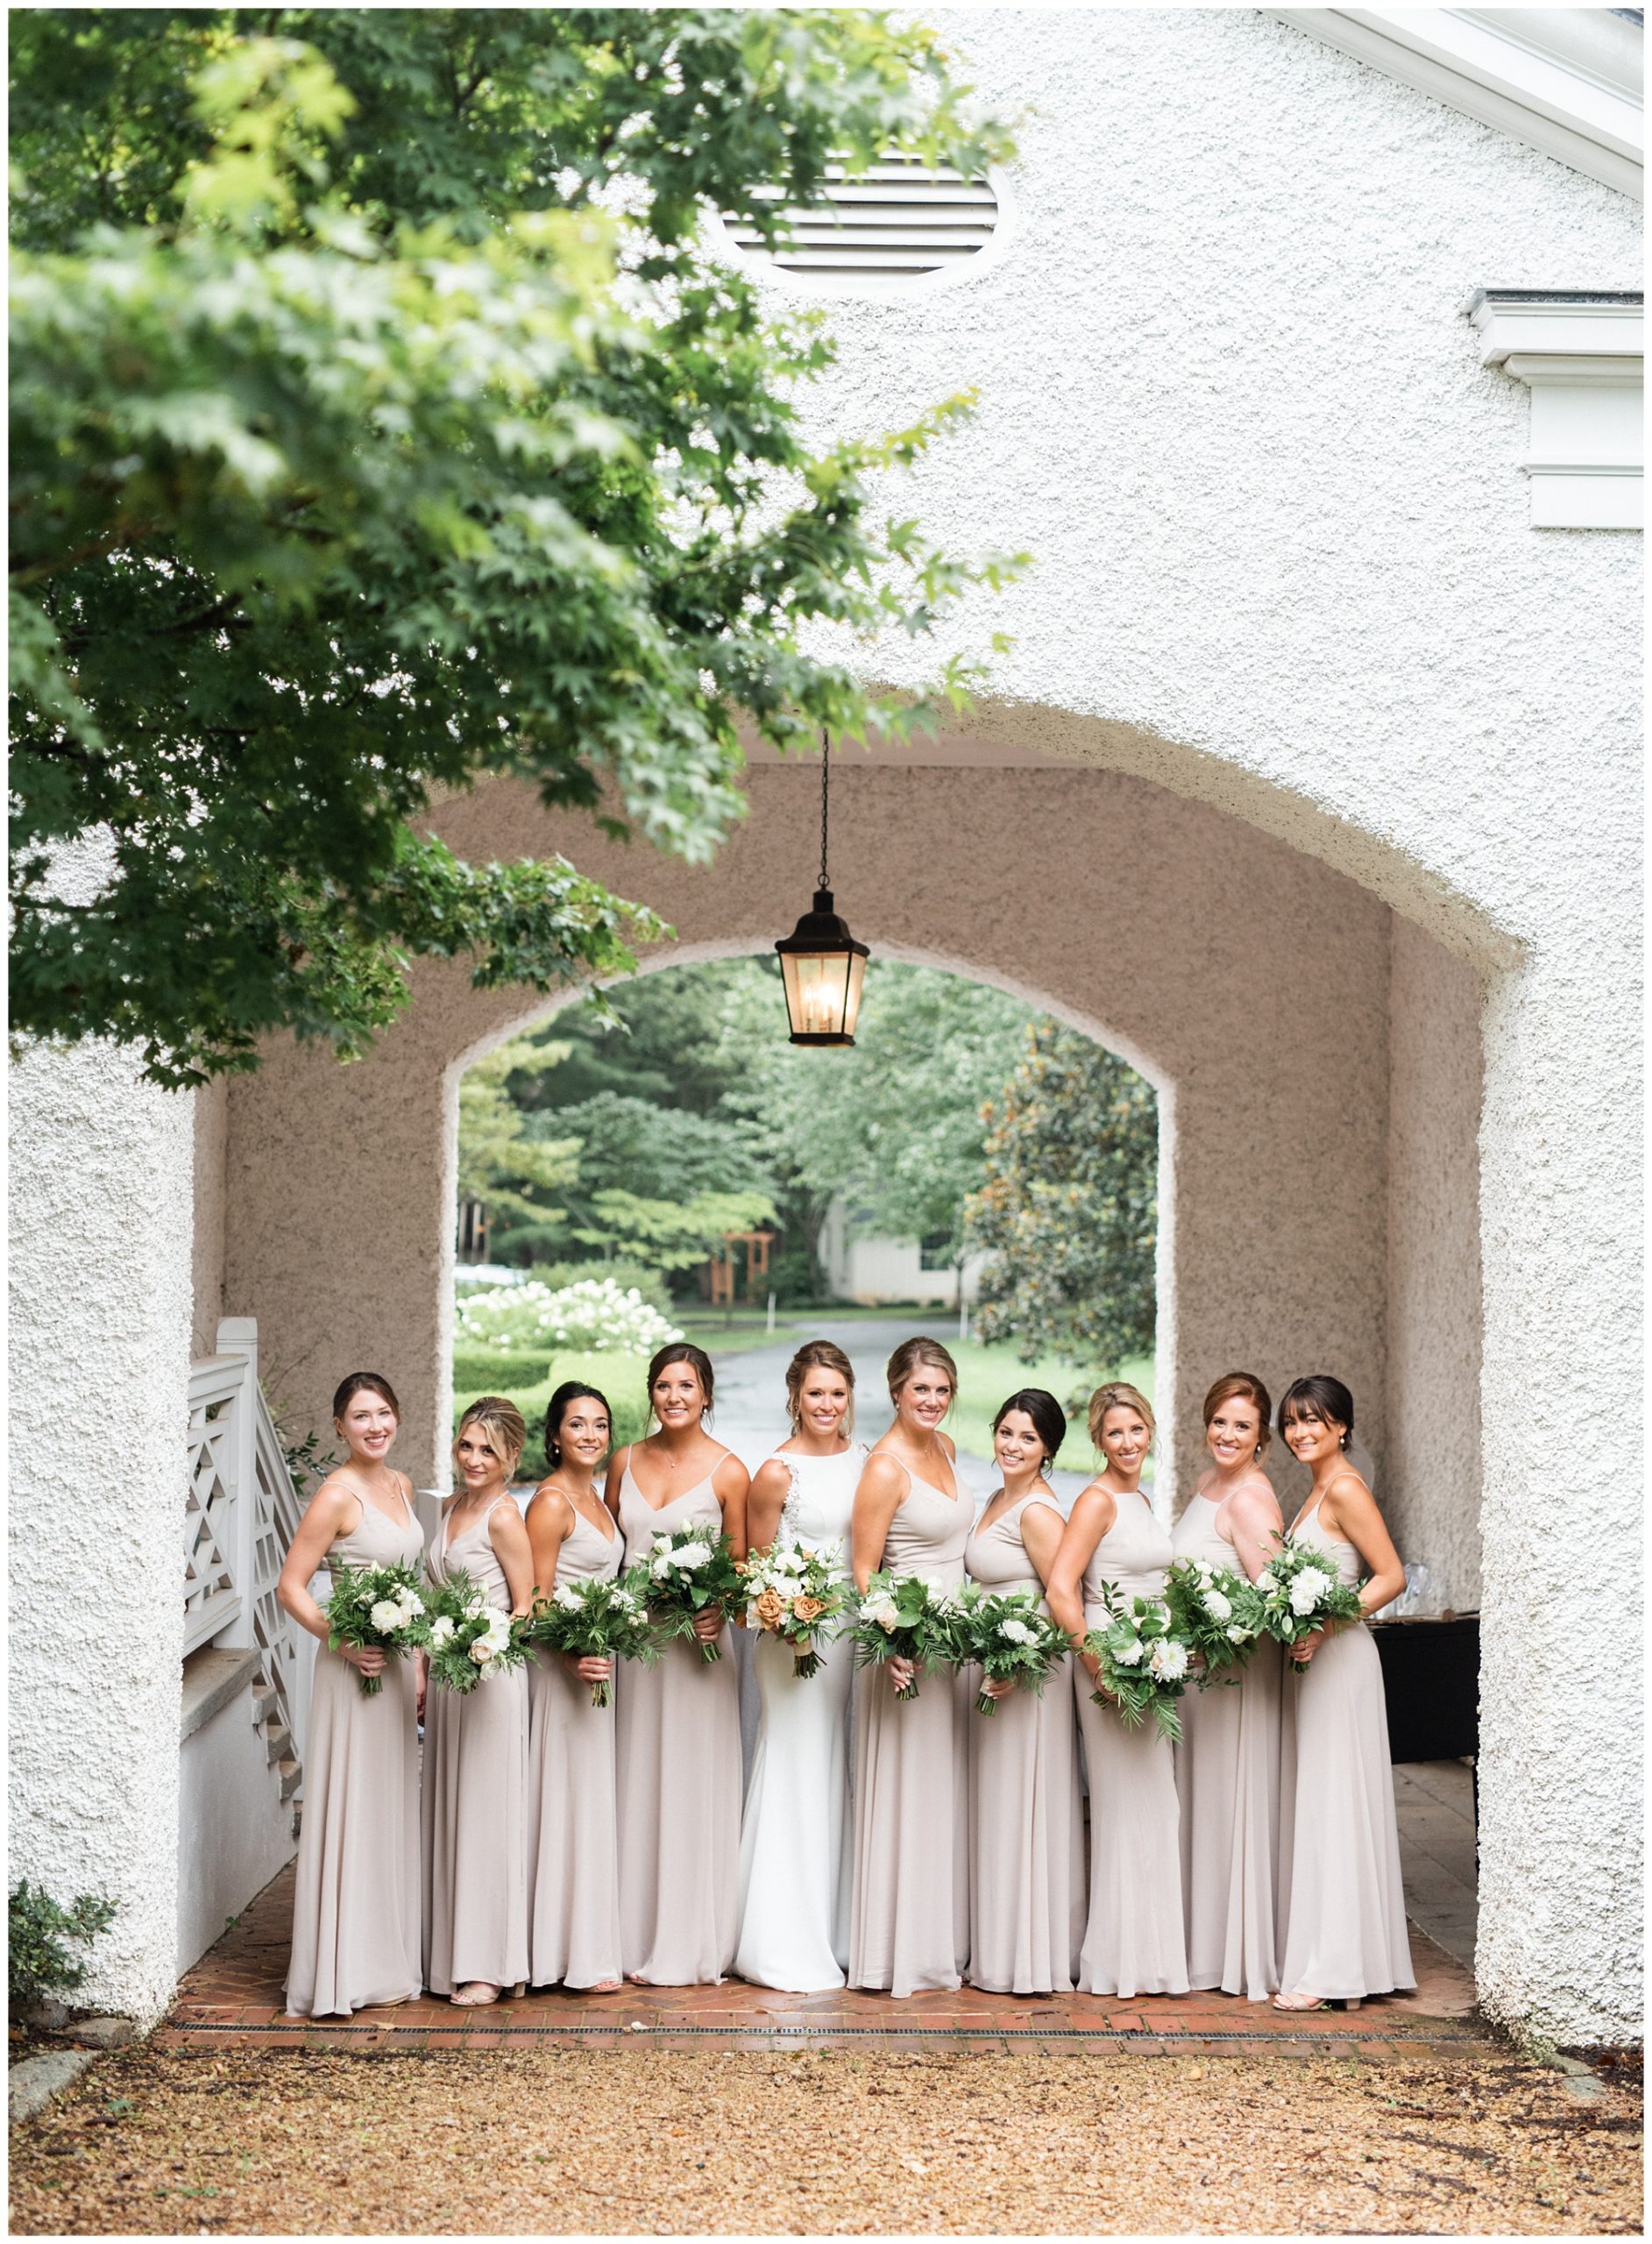 Bridesmaids in matching dresses